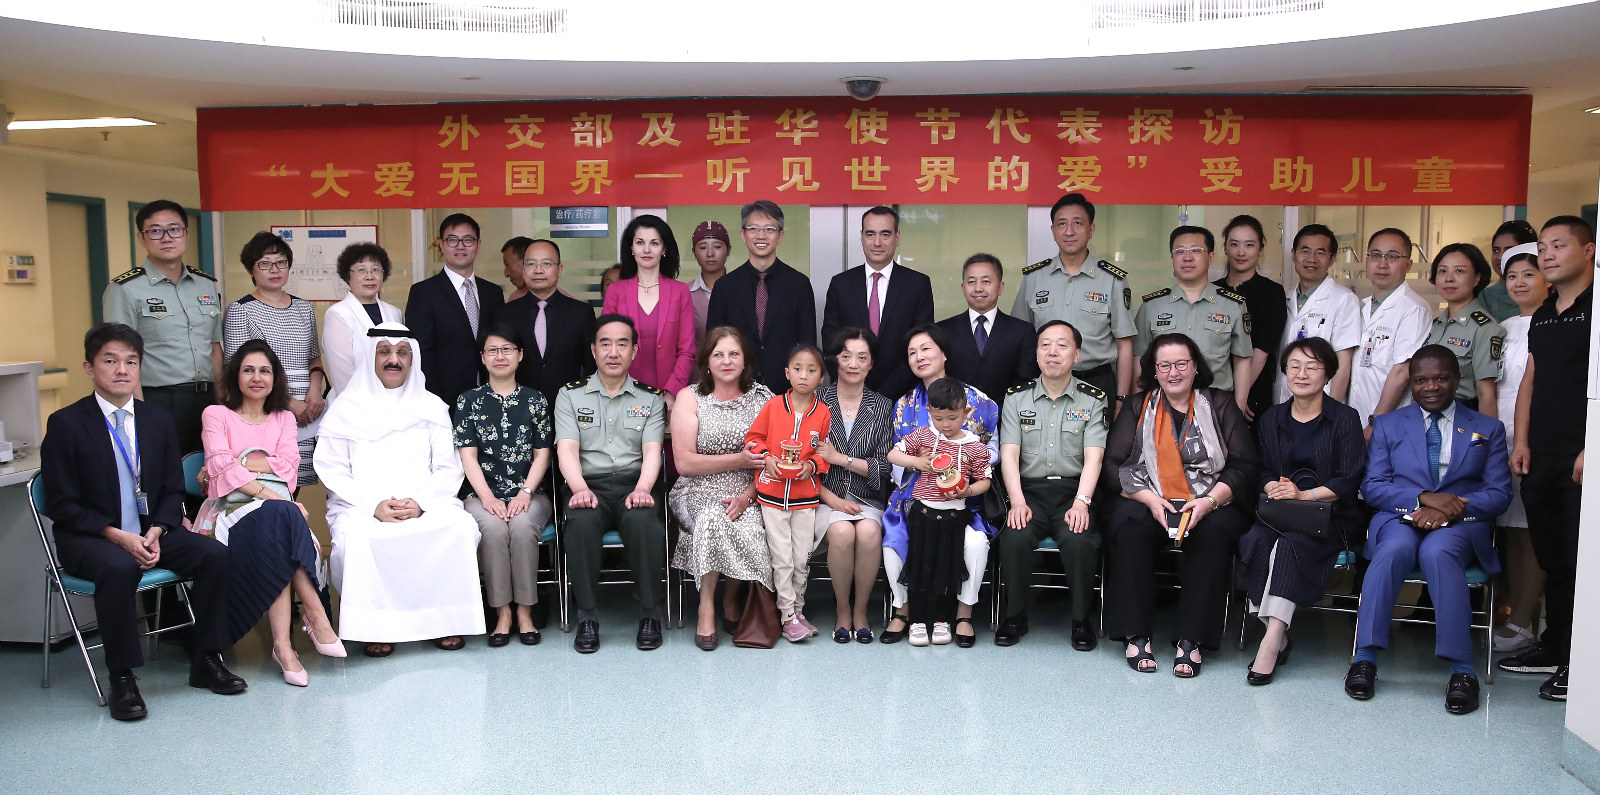 Madame Qian Wei and the representatives from foreign embassies in China visited two other child patients in recovery from the cochlear implant surgeries